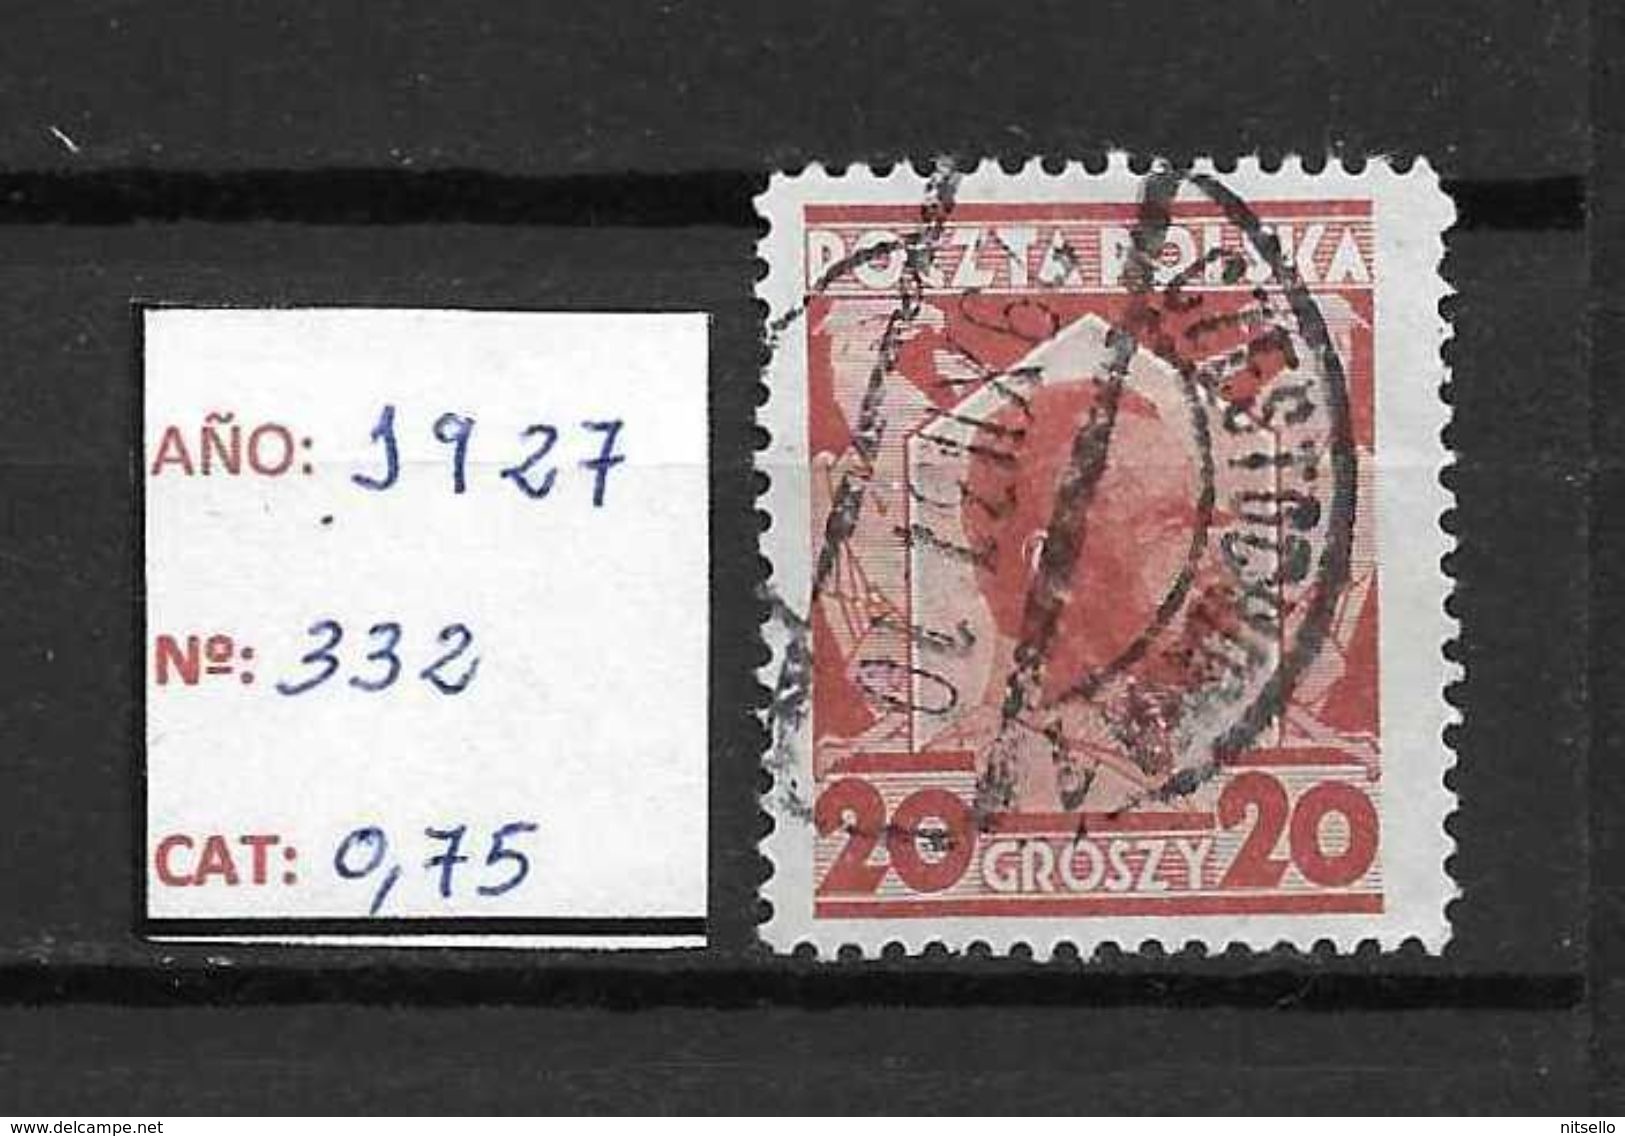 LOTE 1787  ///   POLONIA 1927   YVERT Nº: 332       ¡¡¡¡ LIQUIDATION !!!! - Used Stamps